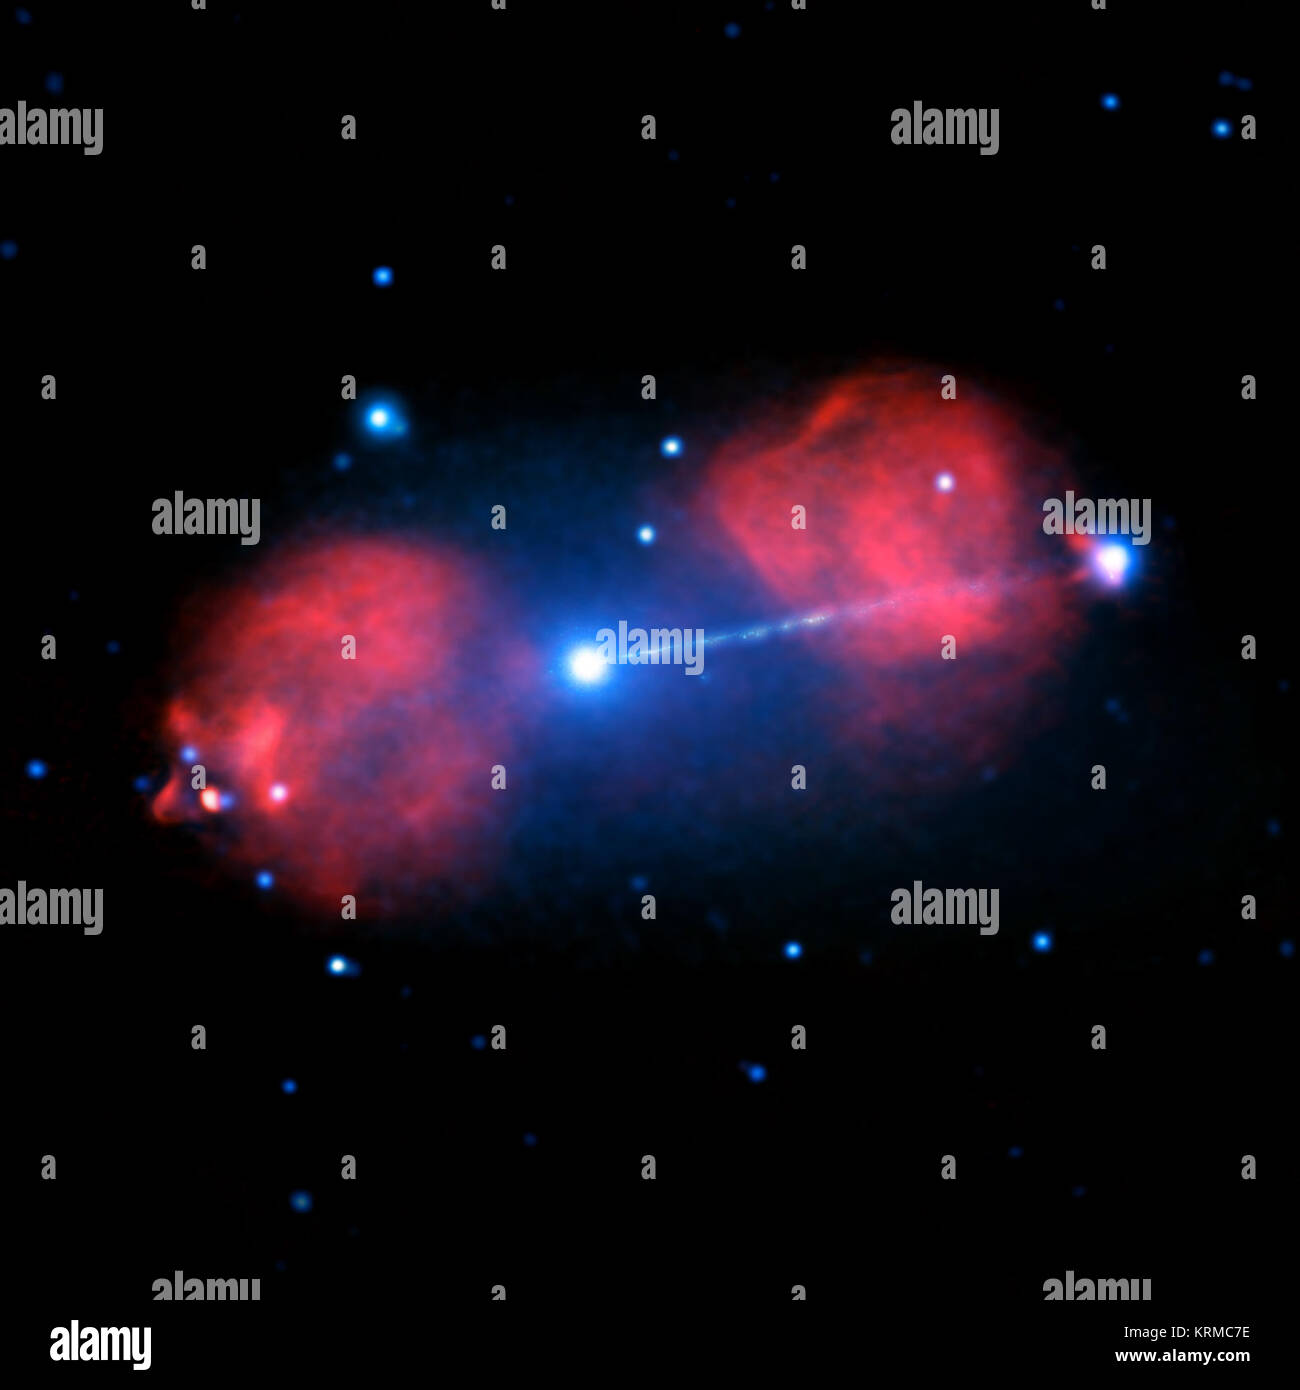 The Pictor A galaxy has a supermassive black hole at its center, and material falling onto the black hole is driving an enormous beam, or jet, of particles at nearly the speed of light into intergalactic space. This composite image contains X-ray data obtained by Chandra at various times over 15 years (blue) and radio data from the Australia Telescope Compact Array (red). By studying the details of the structure seen in both X-rays and radio waves, scientists seek to gain a deeper understanding of these huge collimated blasts. Pictor A composite Stock Photo